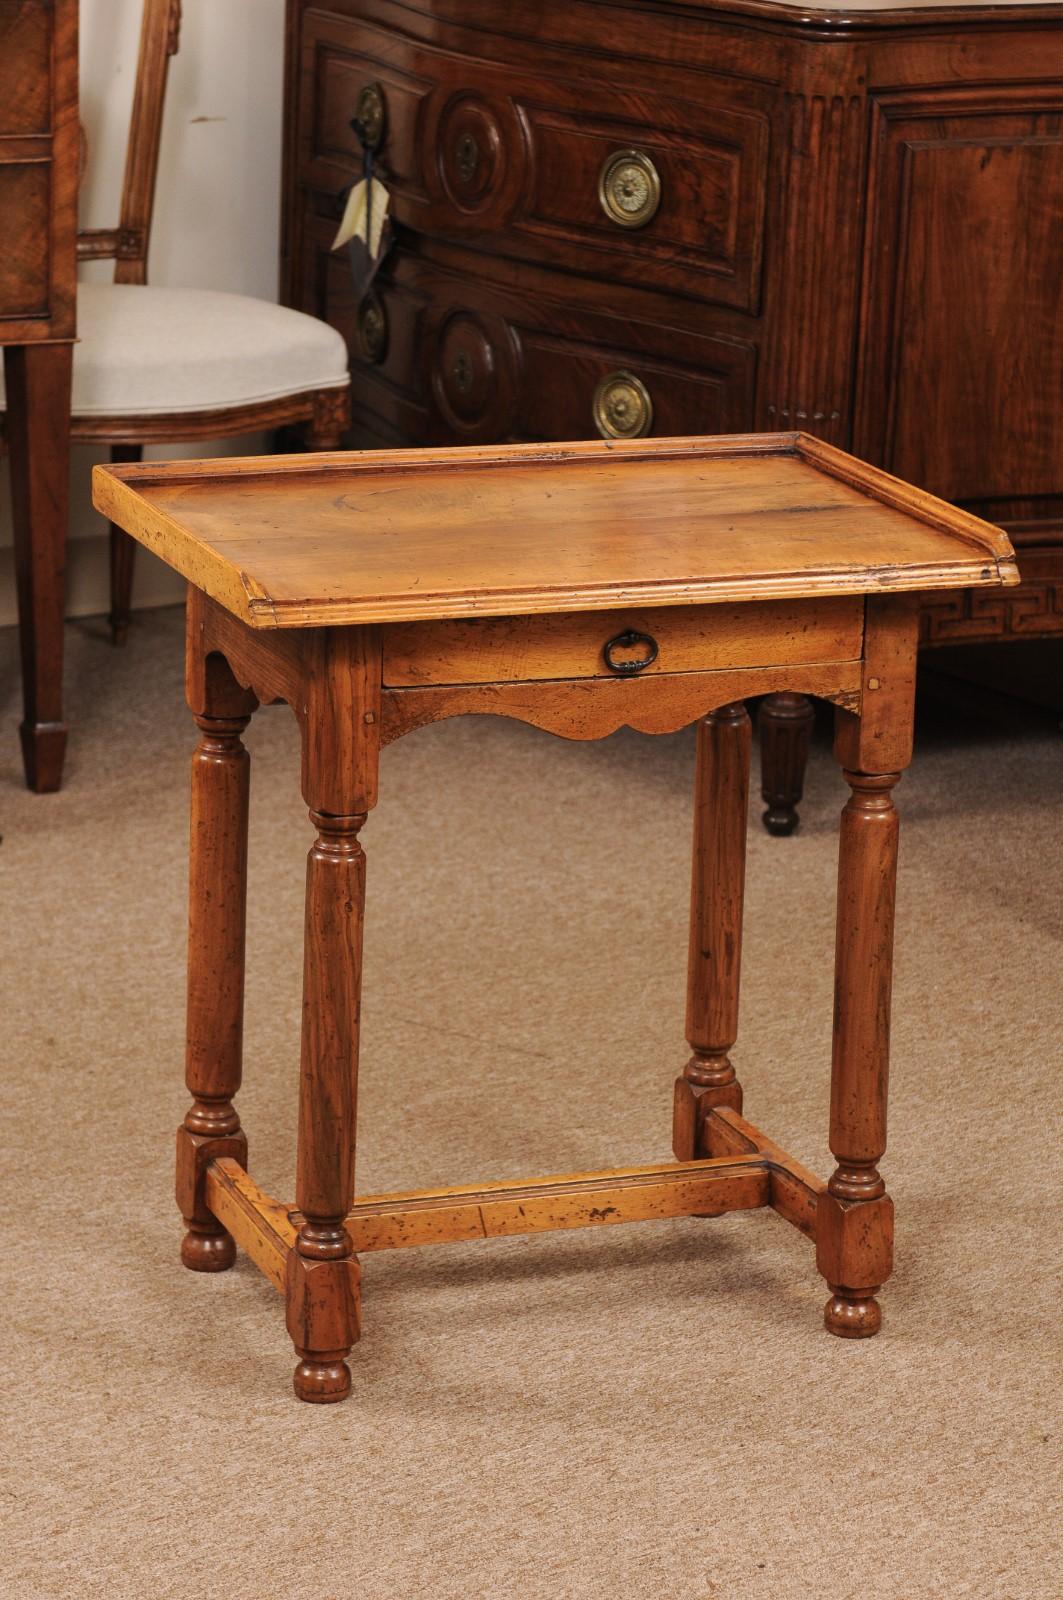 The late 19th century Directoire style walnut side table with tray top, drawer below with ring pull, shaped apron, turned legs joined by H-form stretcher ending in rounded feet.

    